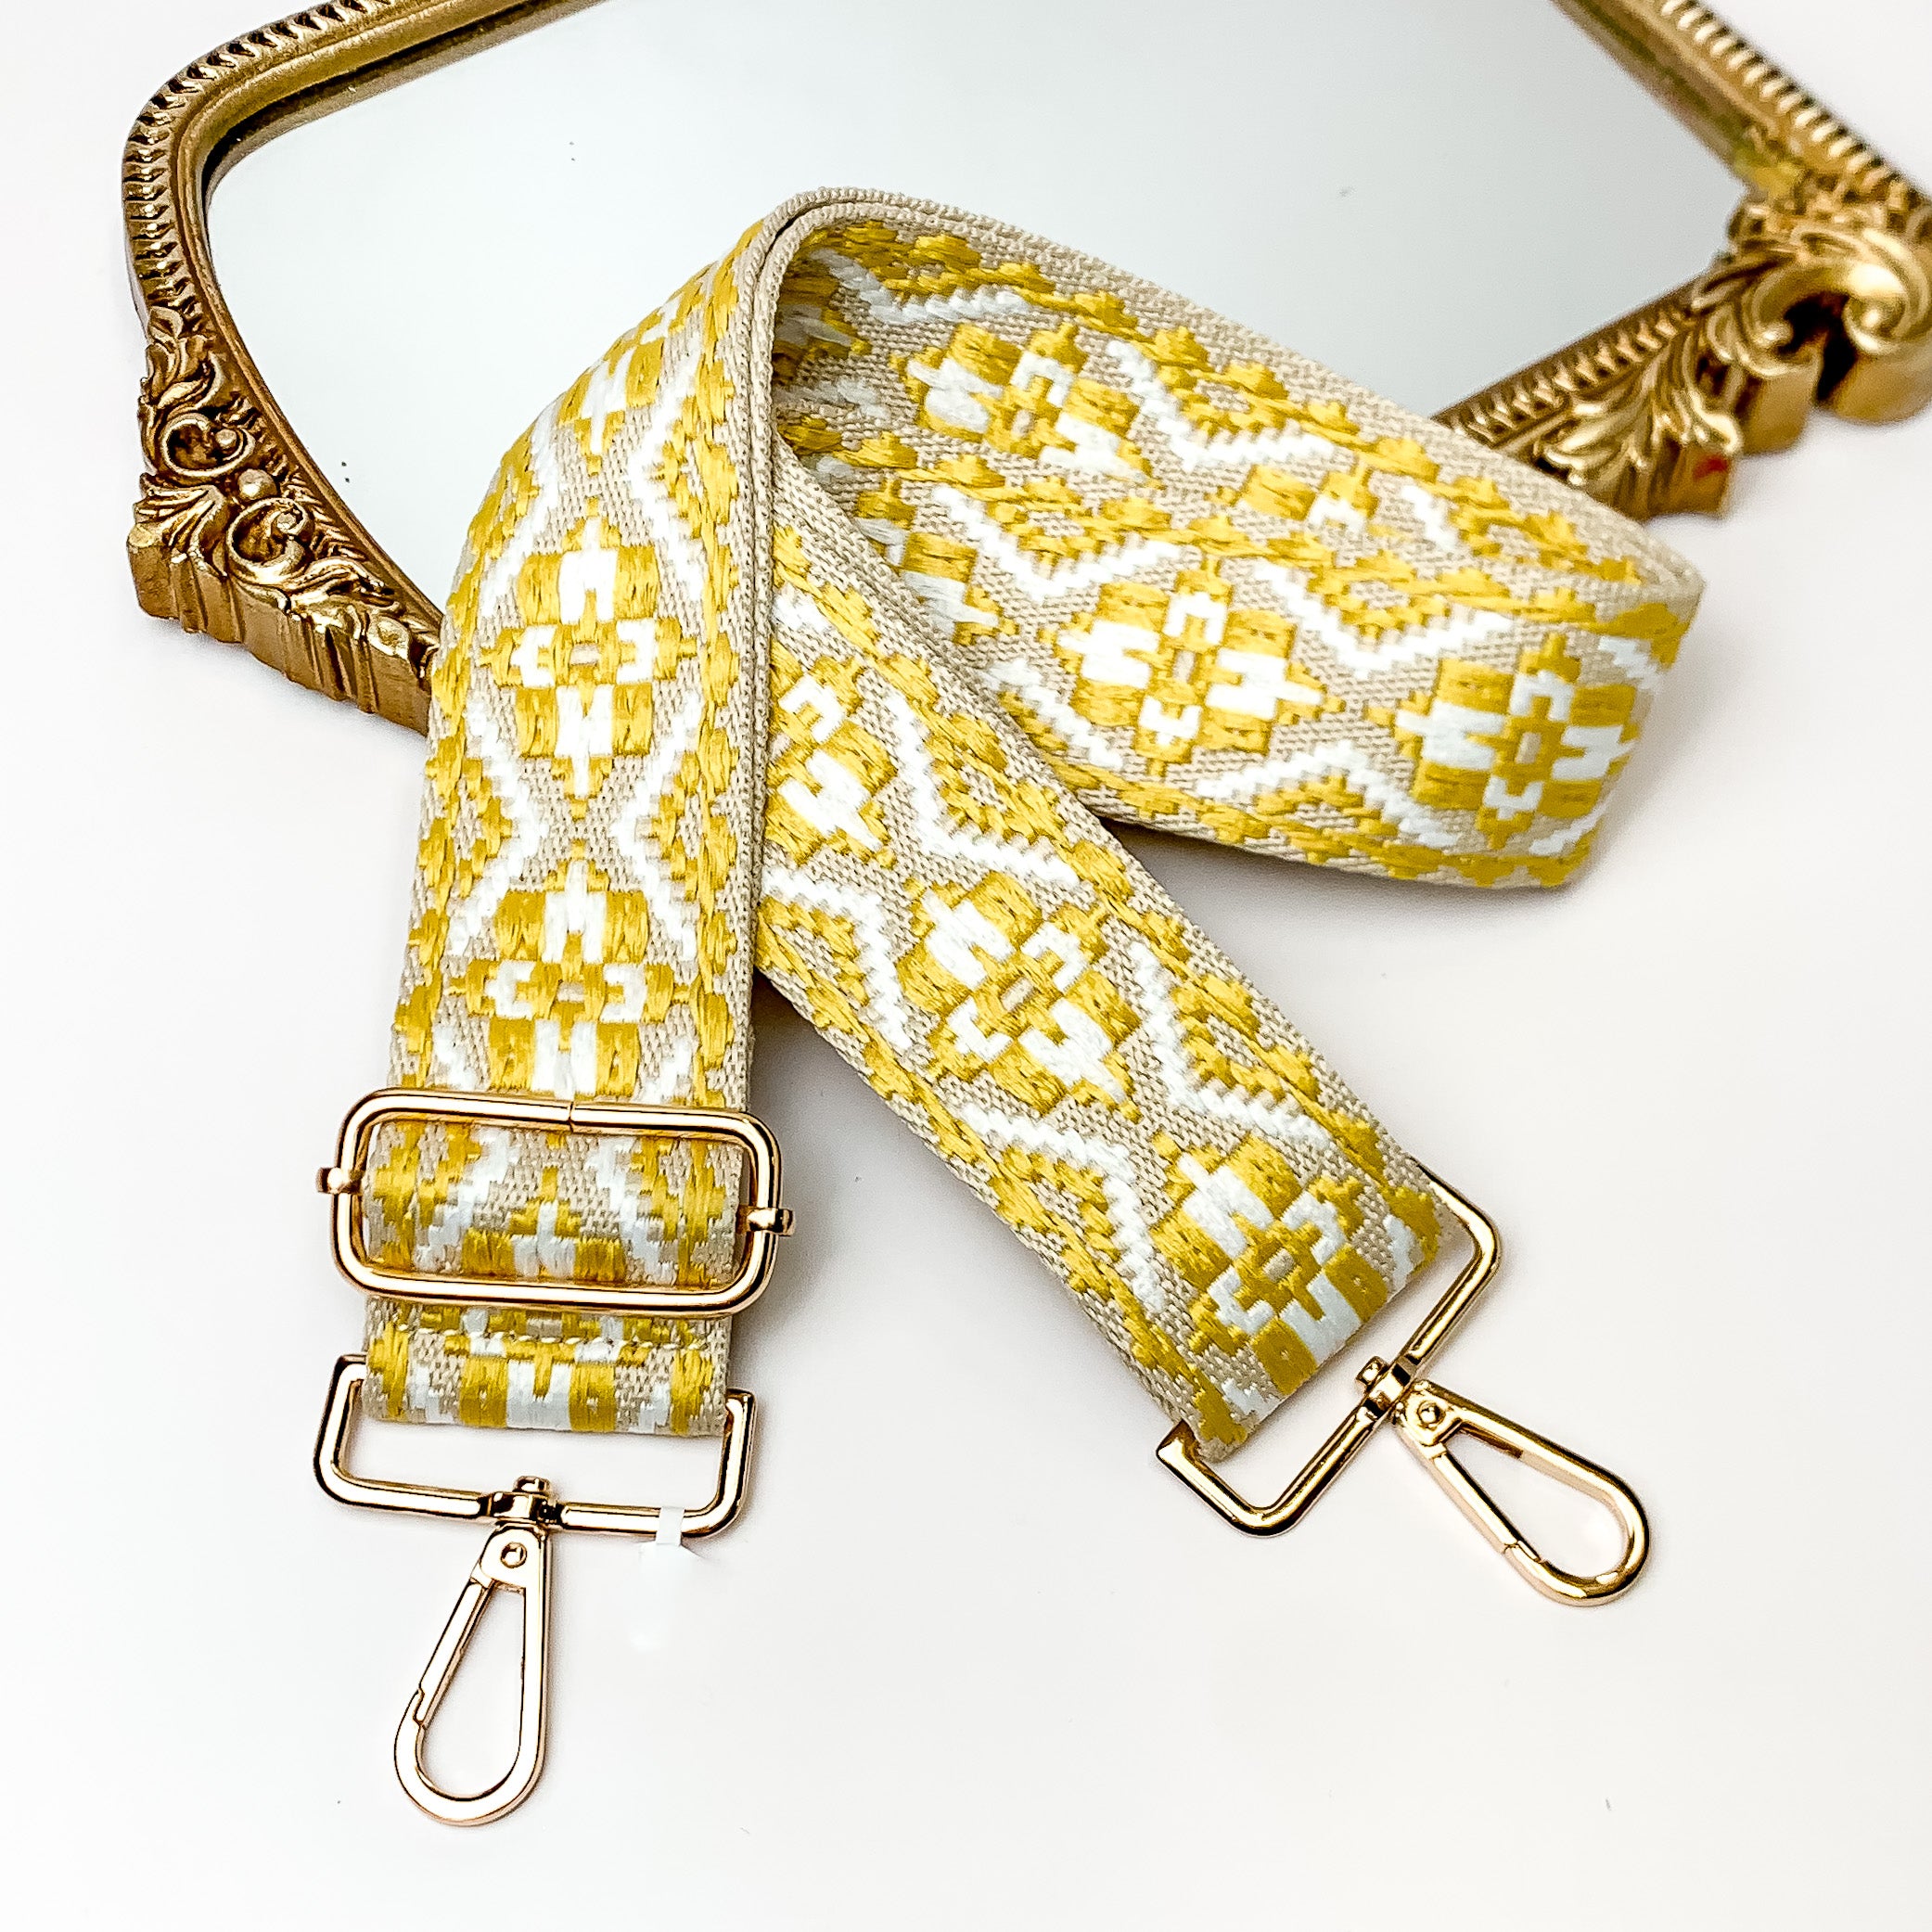 Beige canvas purse strap with white and yelow embroidered aztec design. This purse strap includes gold accents. This purse strap is pictured partially laying on a gold mirror on a white background.